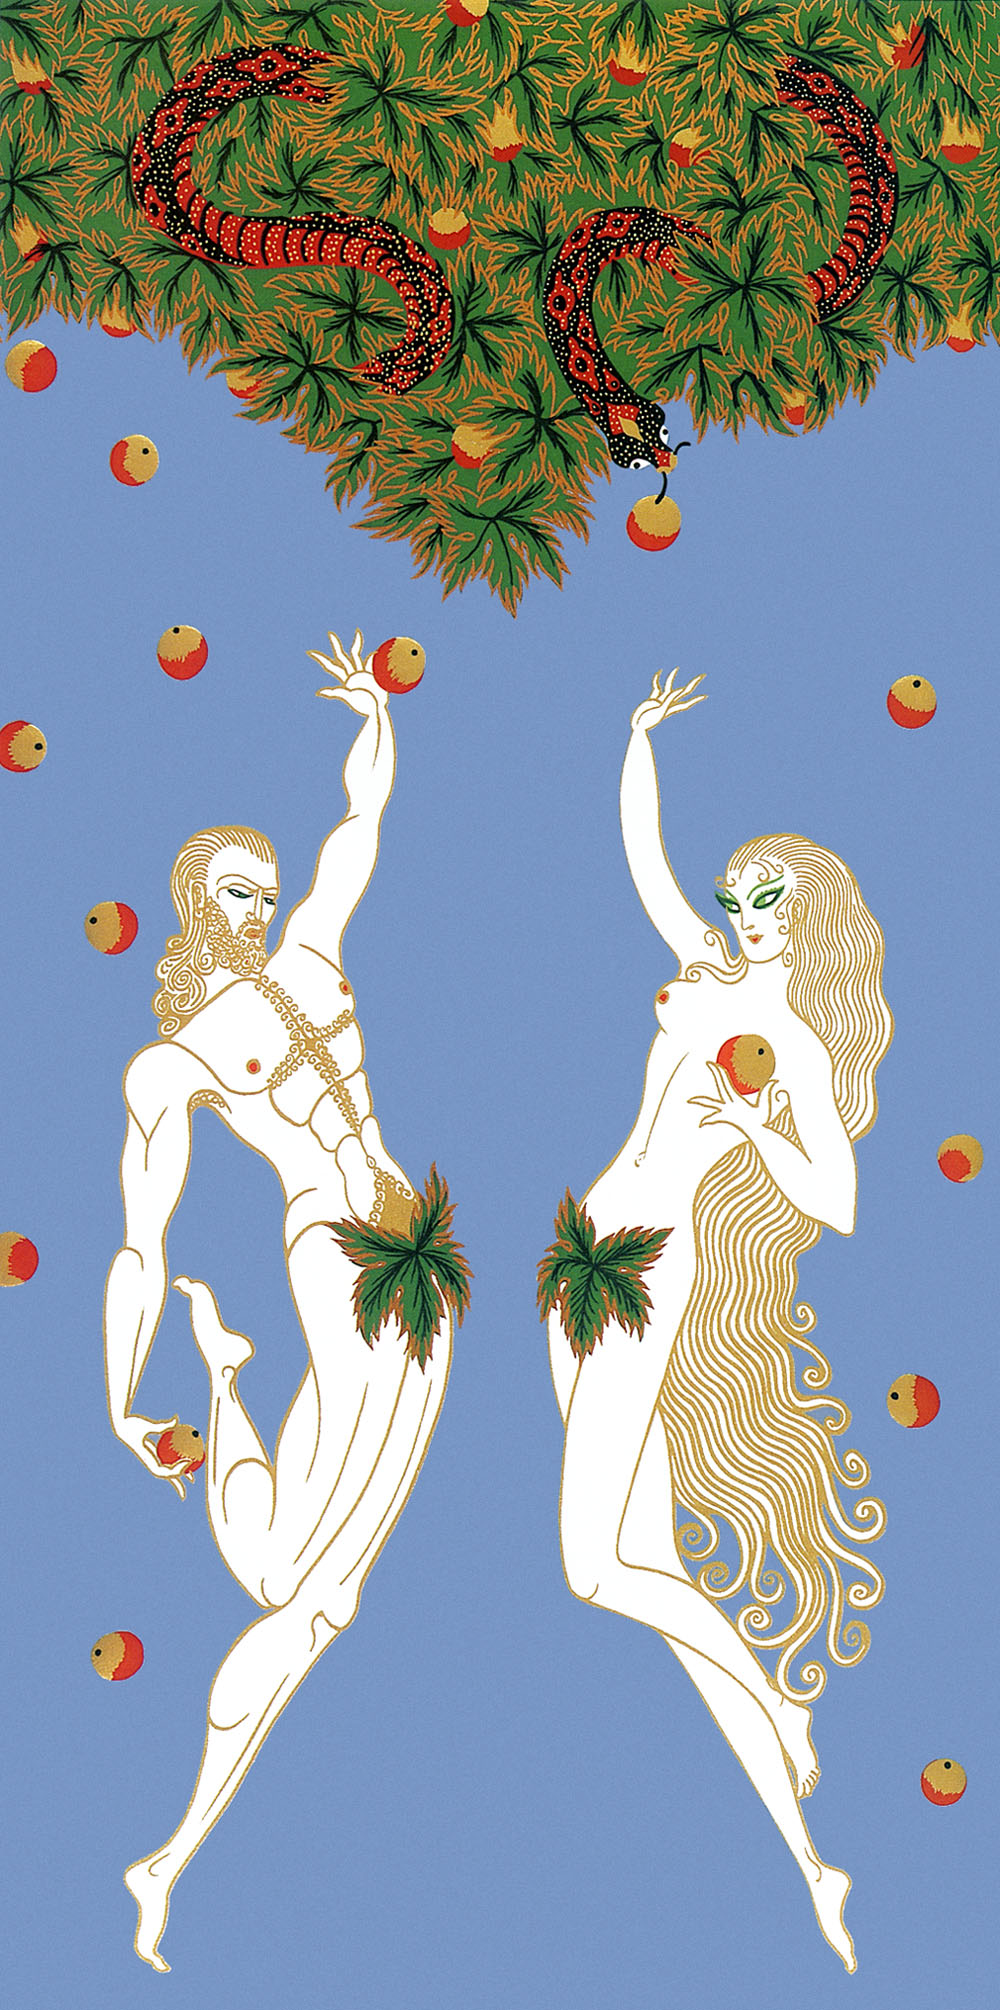 Adam And Eve by Erte, 1982